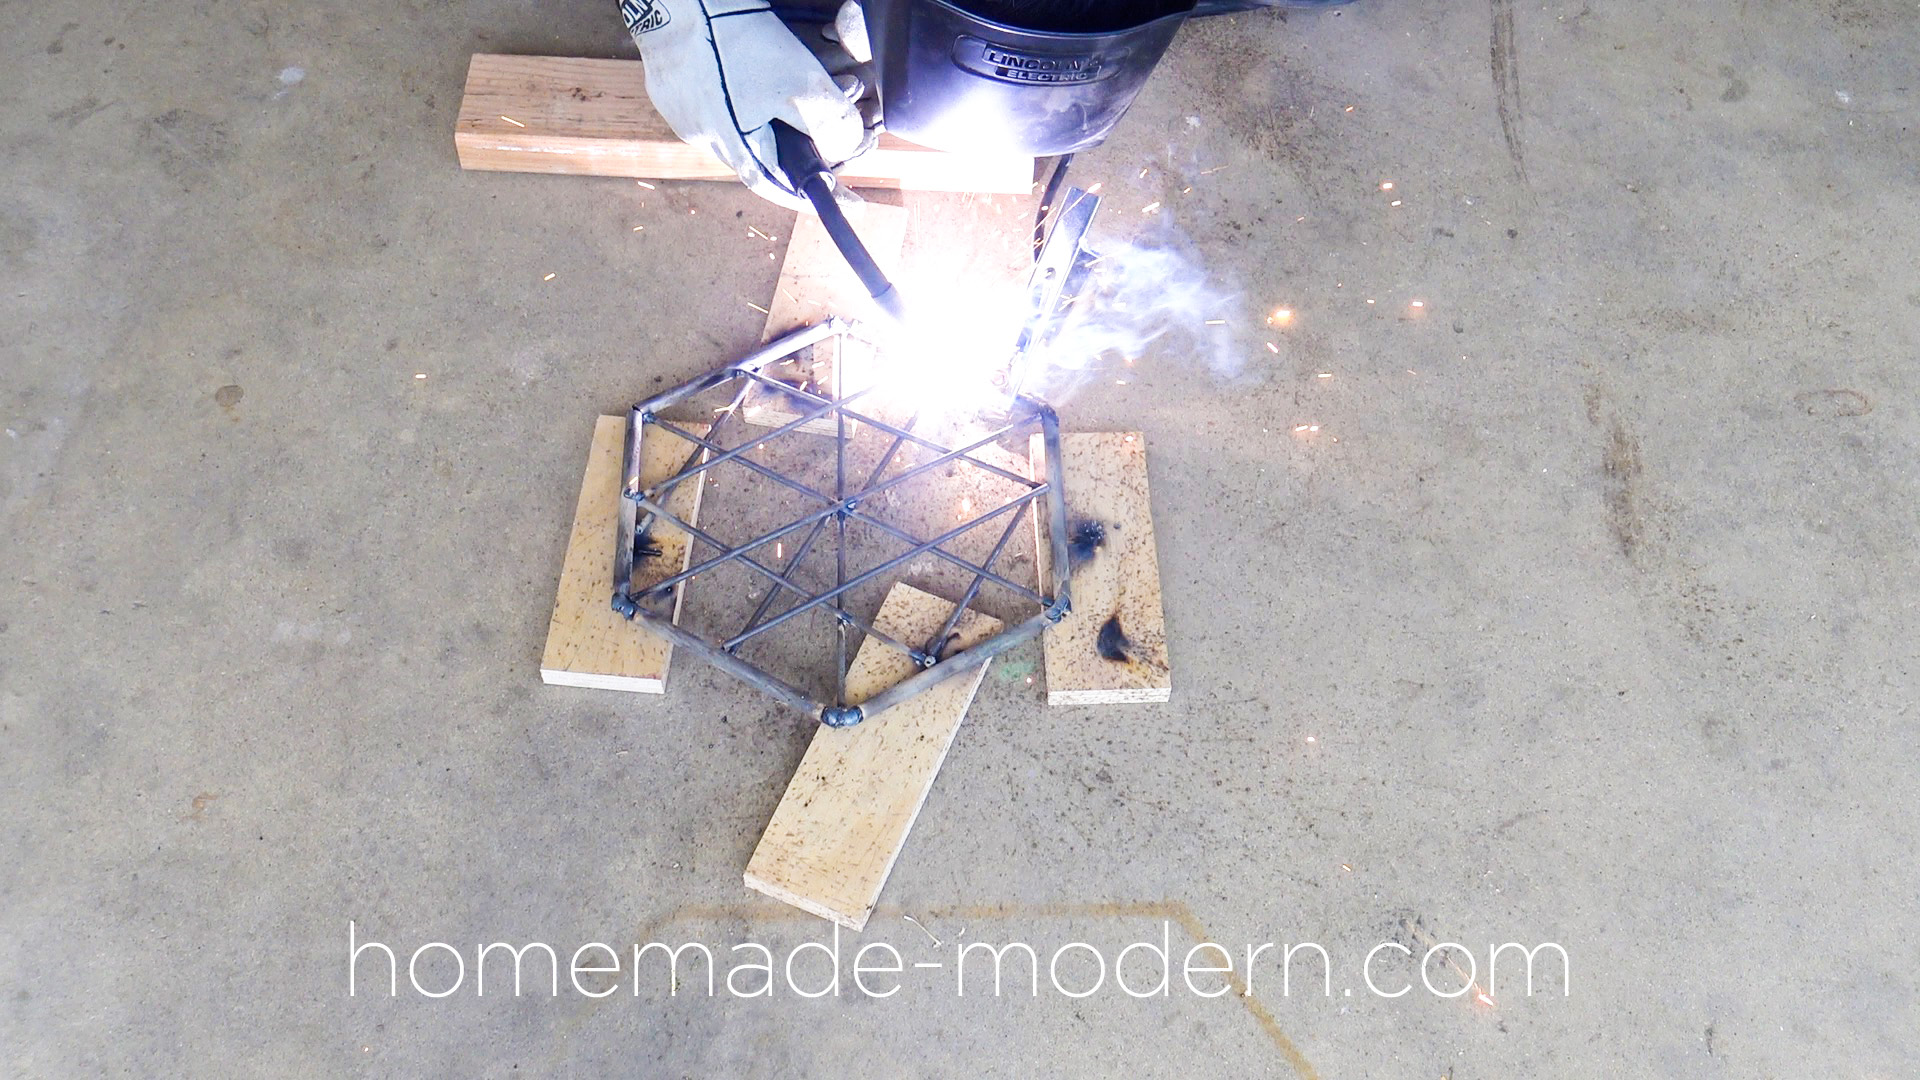 This DIY modern steel fire pit designed by Ben Uyeda is made out of steel rods from Home Depot that are welded together. For more information go to HomeMade-Modern.com